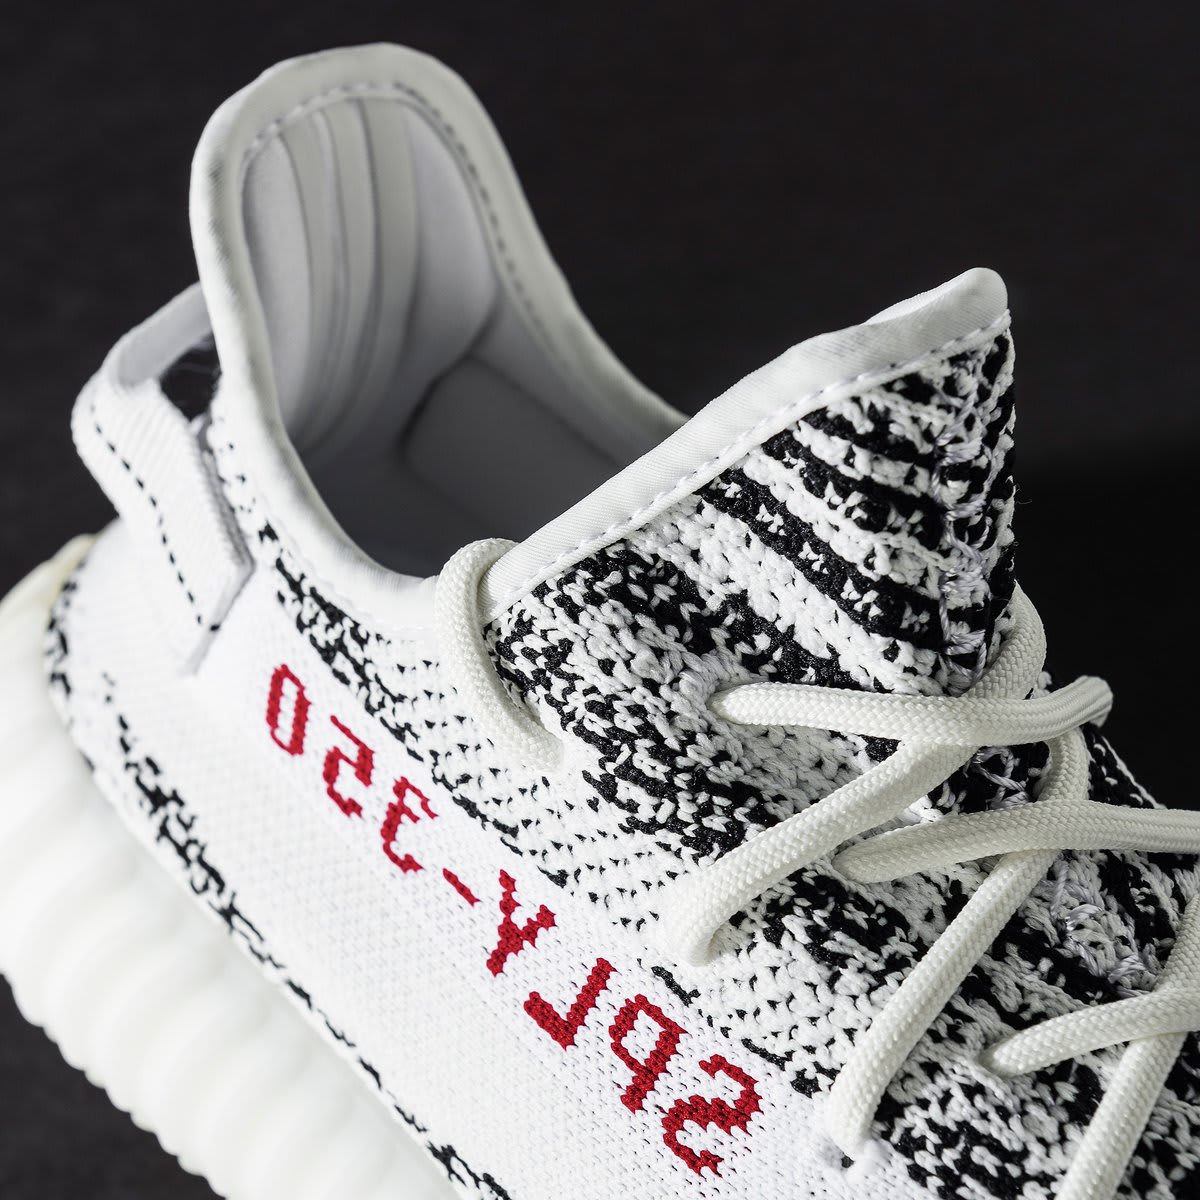 Adidas Yeezy 350 Boost V2 Zebra Release Date Tongue CP9654